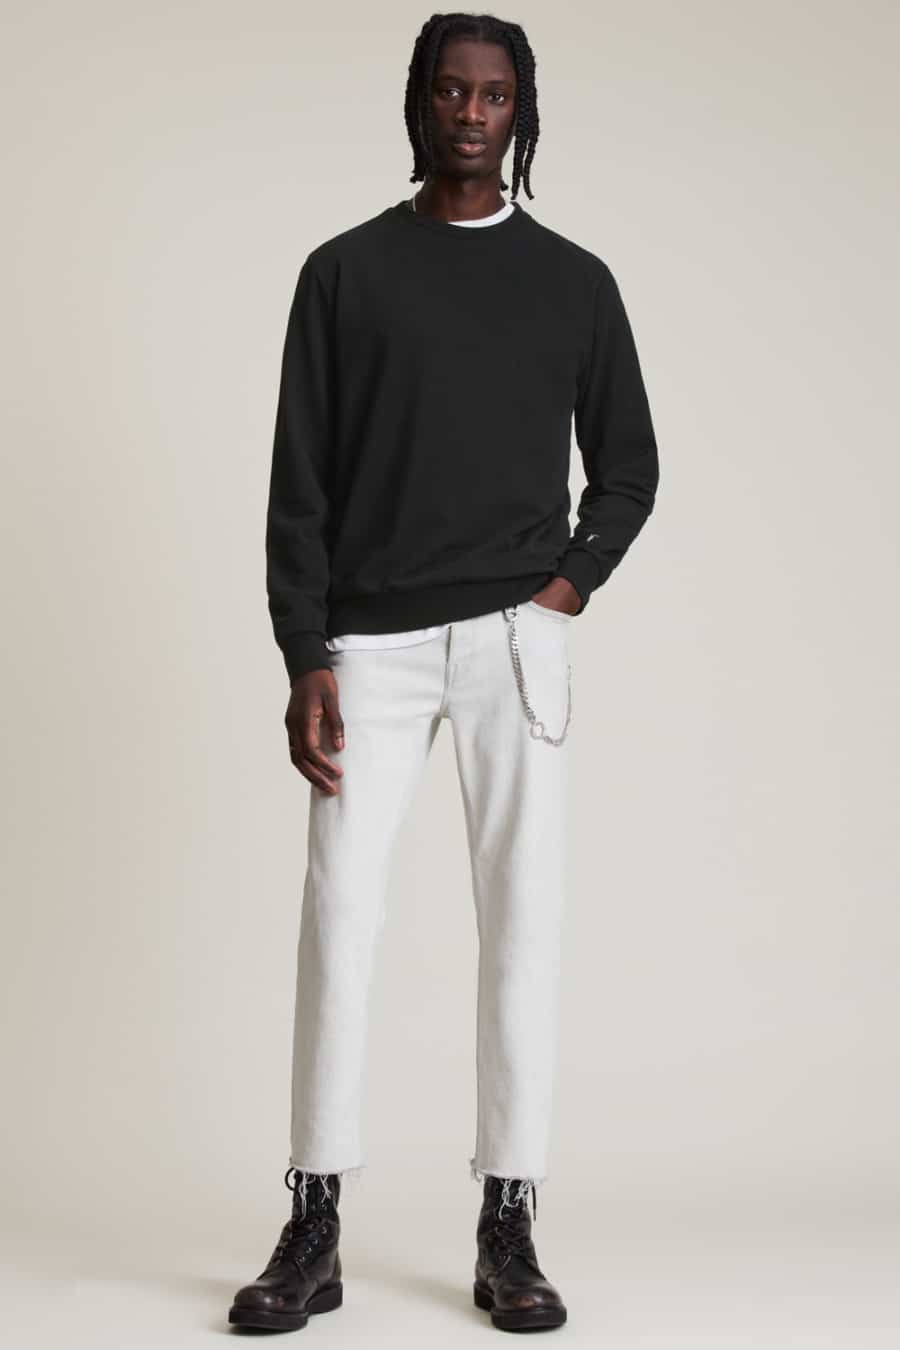 An Easy, Chic White Pant Outfit For Fall - Economy of Style